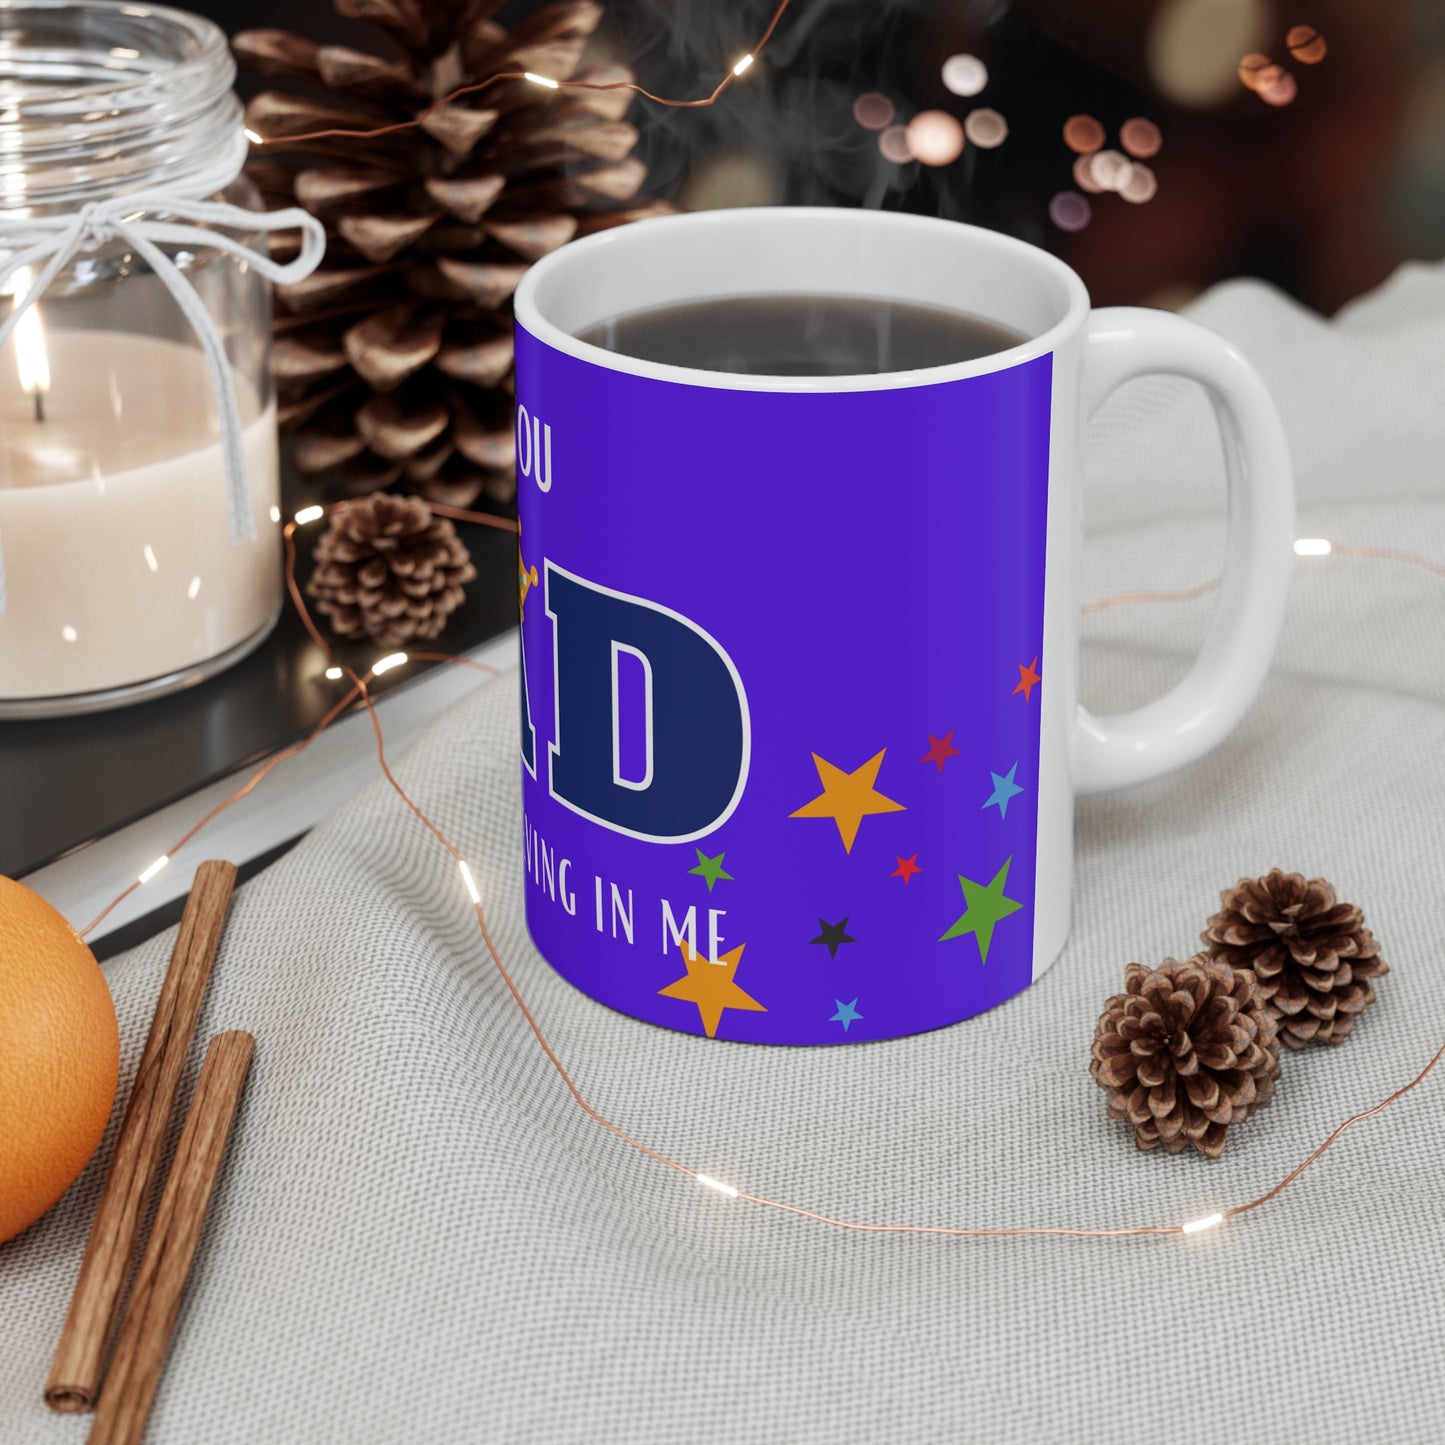 “I LOVE YOU DAD THANK YOU FOR BELIEVING IN ME!” coffee mug for that special dad. A great gift indeed.